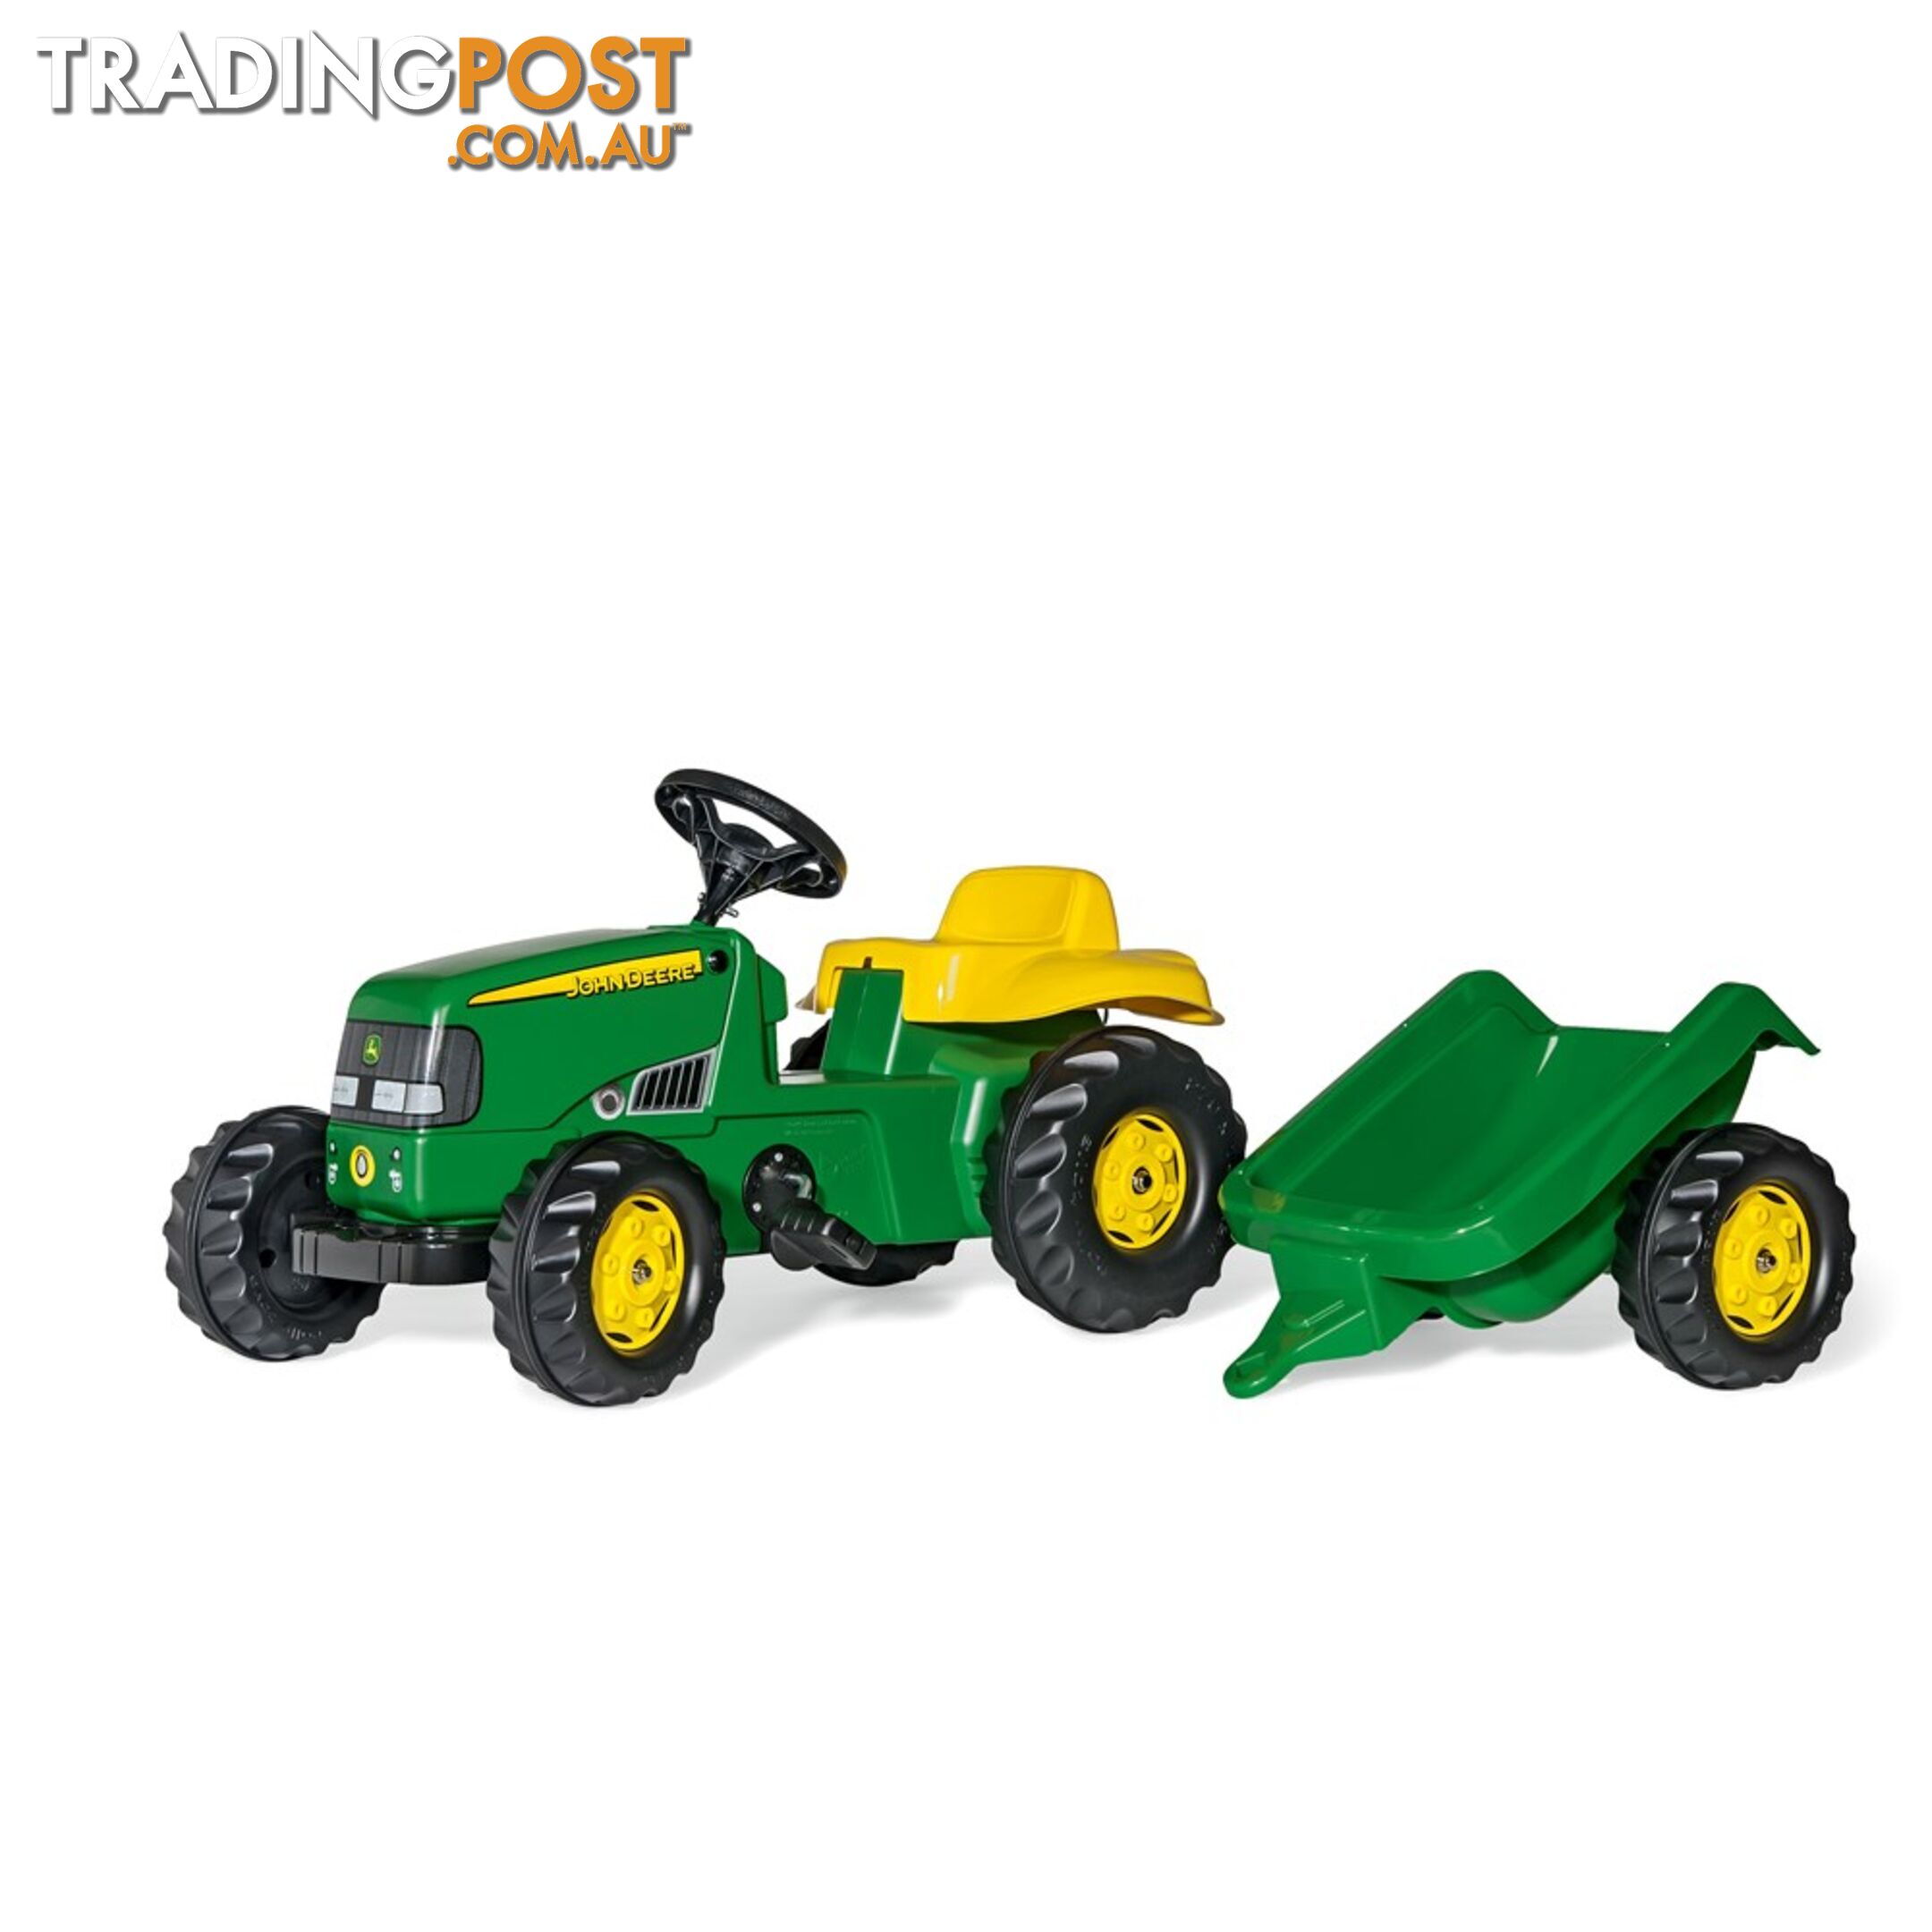 John Deere - Tomy Classic Ride On Tractor With Trailer - ROLLY KID - Lcrt012190 - 4006485012190